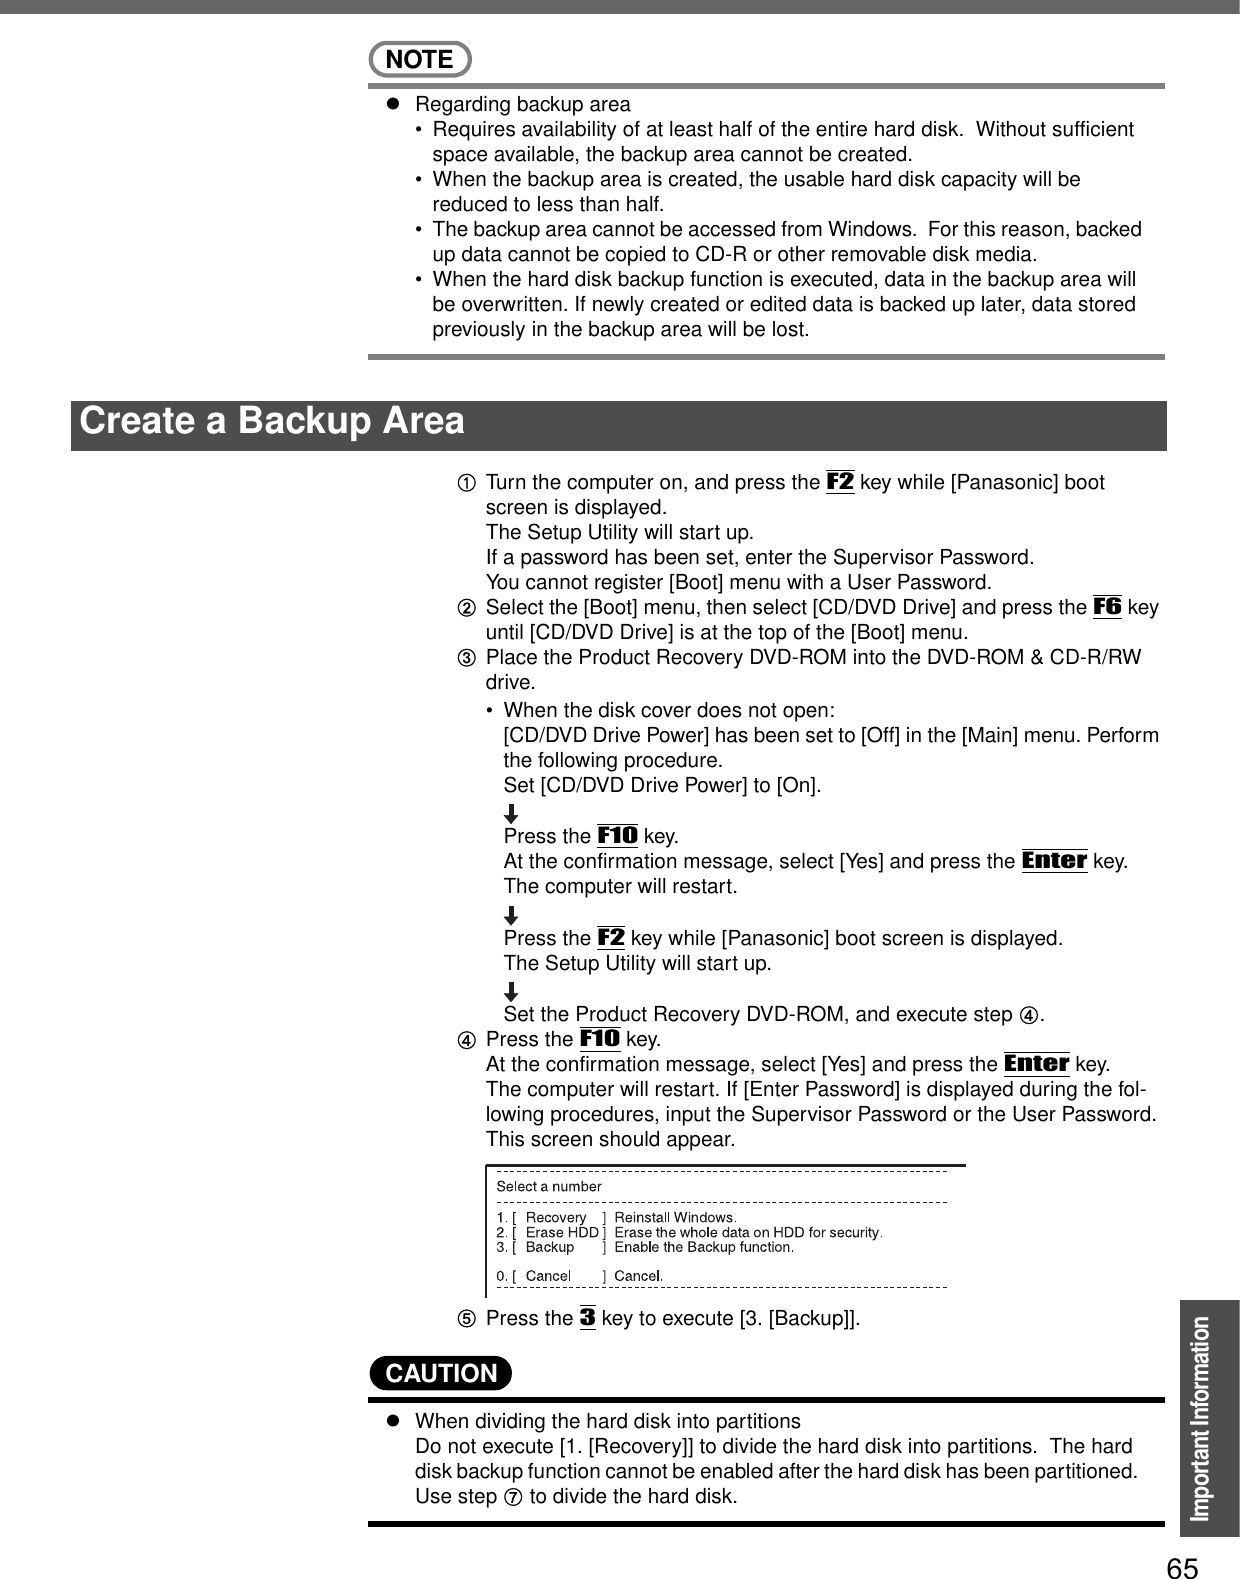 65Important InformationNOTEzRegarding backup area• Requires availability of at least half of the entire hard disk.  Without sufficient space available, the backup area cannot be created.• When the backup area is created, the usable hard disk capacity will be reduced to less than half.• The backup area cannot be accessed from Windows.  For this reason, backed up data cannot be copied to CD-R or other removable disk media.• When the hard disk backup function is executed, data in the backup area will be overwritten. If newly created or edited data is backed up later, data stored previously in the backup area will be lost.ATurn the computer on, and press the F2 key while [Panasonic] boot screen is displayed.The Setup Utility will start up.If a password has been set, enter the Supervisor Password.You cannot register [Boot] menu with a User Password.BSelect the [Boot] menu, then select [CD/DVD Drive] and press the F6 key until [CD/DVD Drive] is at the top of the [Boot] menu.CPlace the Product Recovery DVD-ROM into the DVD-ROM &amp; CD-R/RW drive.• When the disk cover does not open:[CD/DVD Drive Power] has been set to [Off] in the [Main] menu. Perform the following procedure.Set [CD/DVD Drive Power] to [On]. Press the F10 key. At the confirmation message, select [Yes] and press the Enter key.The computer will restart.Press the F2 key while [Panasonic] boot screen is displayed.The Setup Utility will start up.Set the Product Recovery DVD-ROM, and execute step D.DPress the F10 key.At the confirmation message, select [Yes] and press the Enter key.The computer will restart. If [Enter Password] is displayed during the fol-lowing procedures, input the Supervisor Password or the User Password.This screen should appear.EPress the 3 key to execute [3. [Backup]].CAUTIONzWhen dividing the hard disk into partitions Do not execute [1. [Recovery]] to divide the hard disk into partitions.  The hard disk backup function cannot be enabled after the hard disk has been partitioned.  Use step G to divide the hard disk.Create a Backup Area